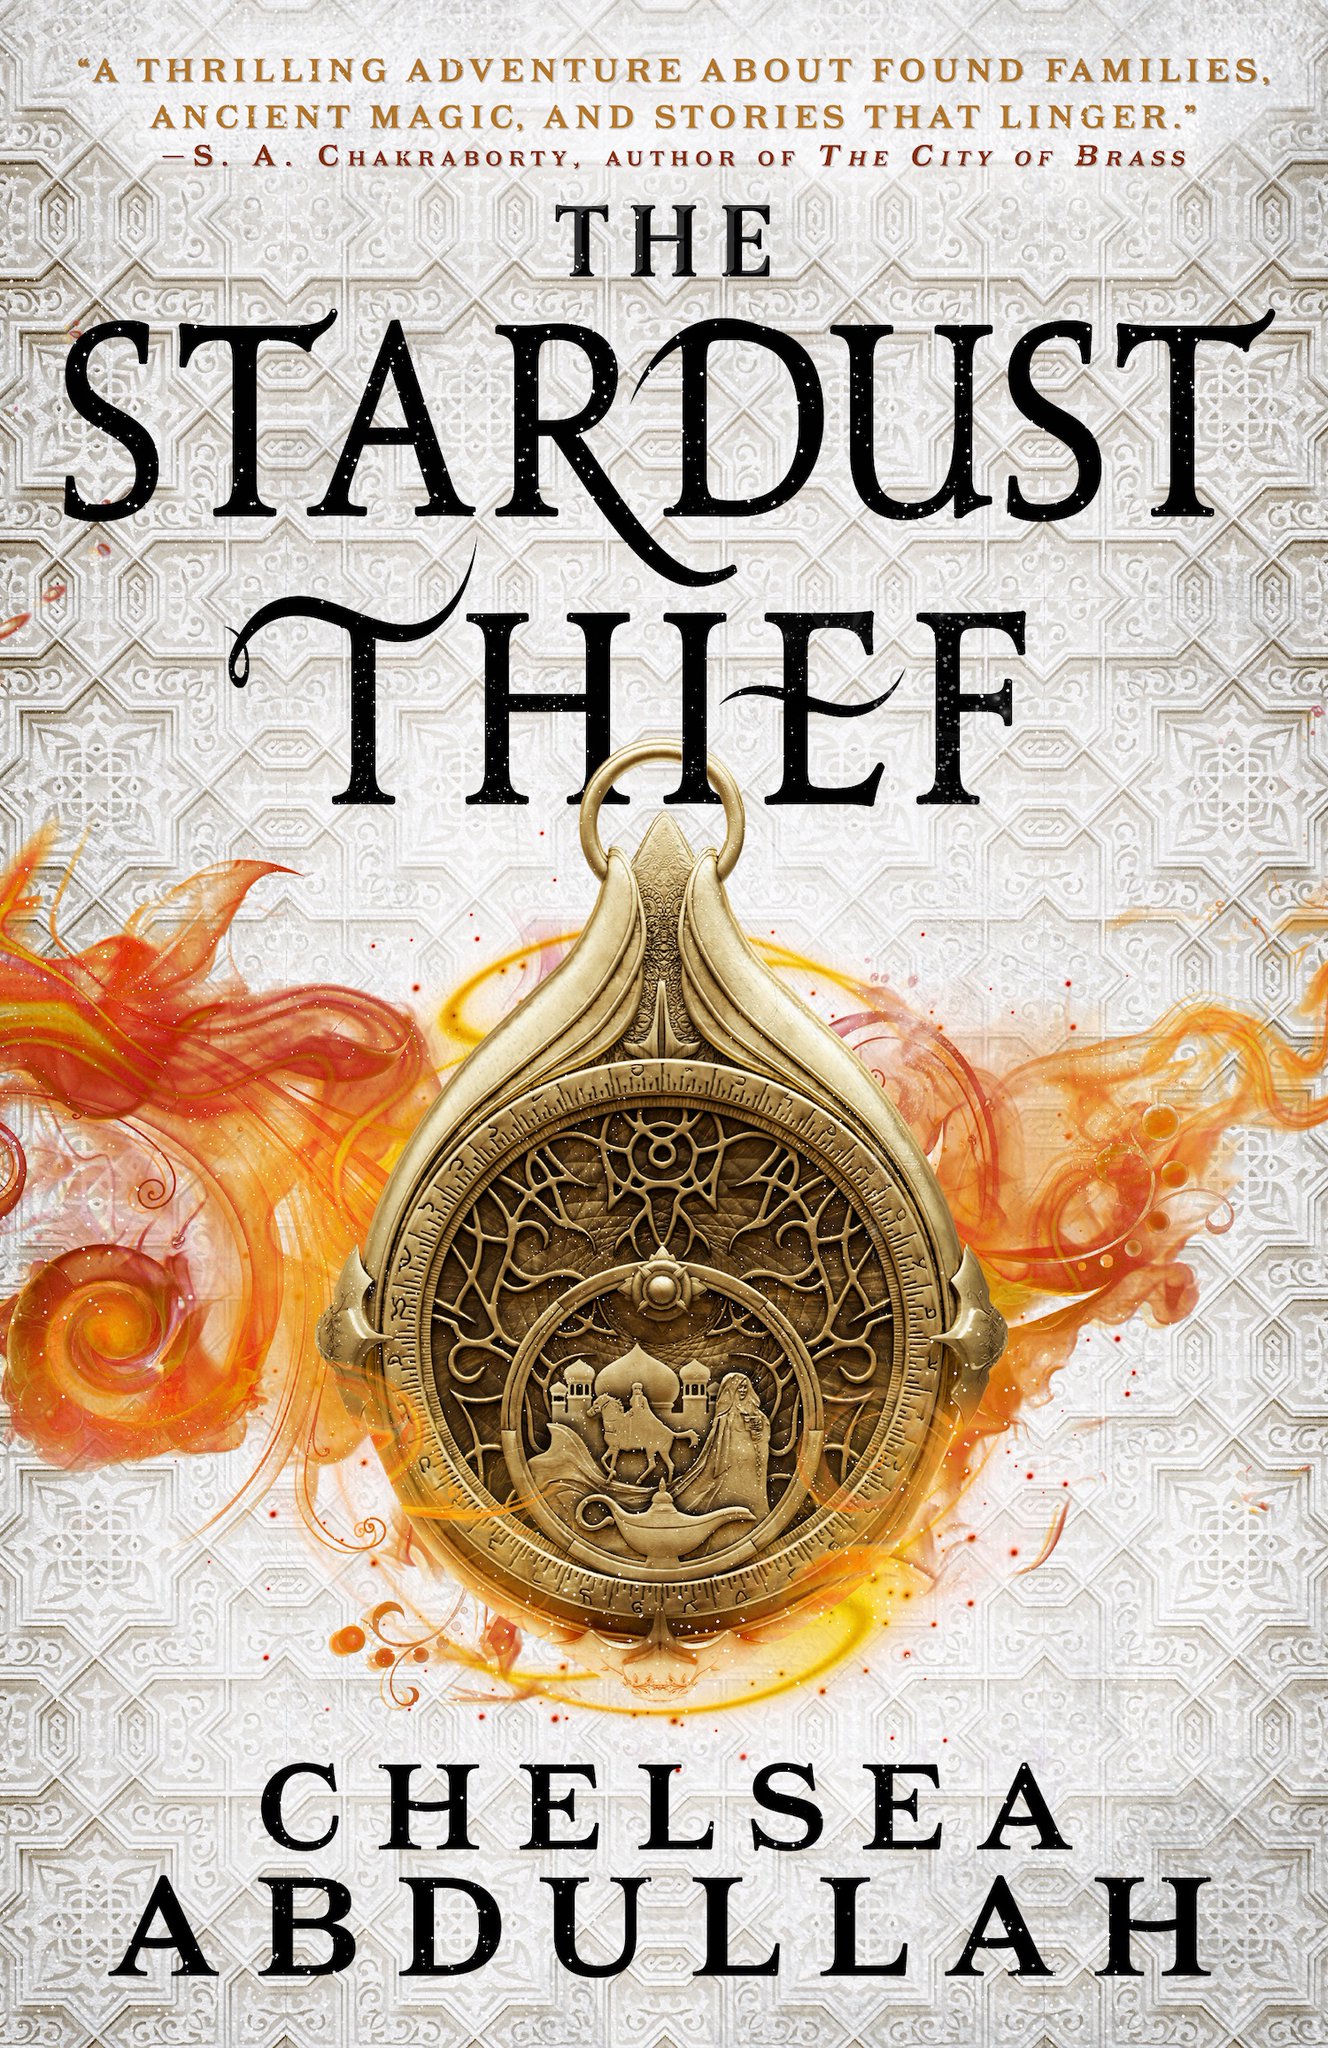 [EPUB] The Sandsea Trilogy #1 The Stardust Thief by Chelsea Abdullah